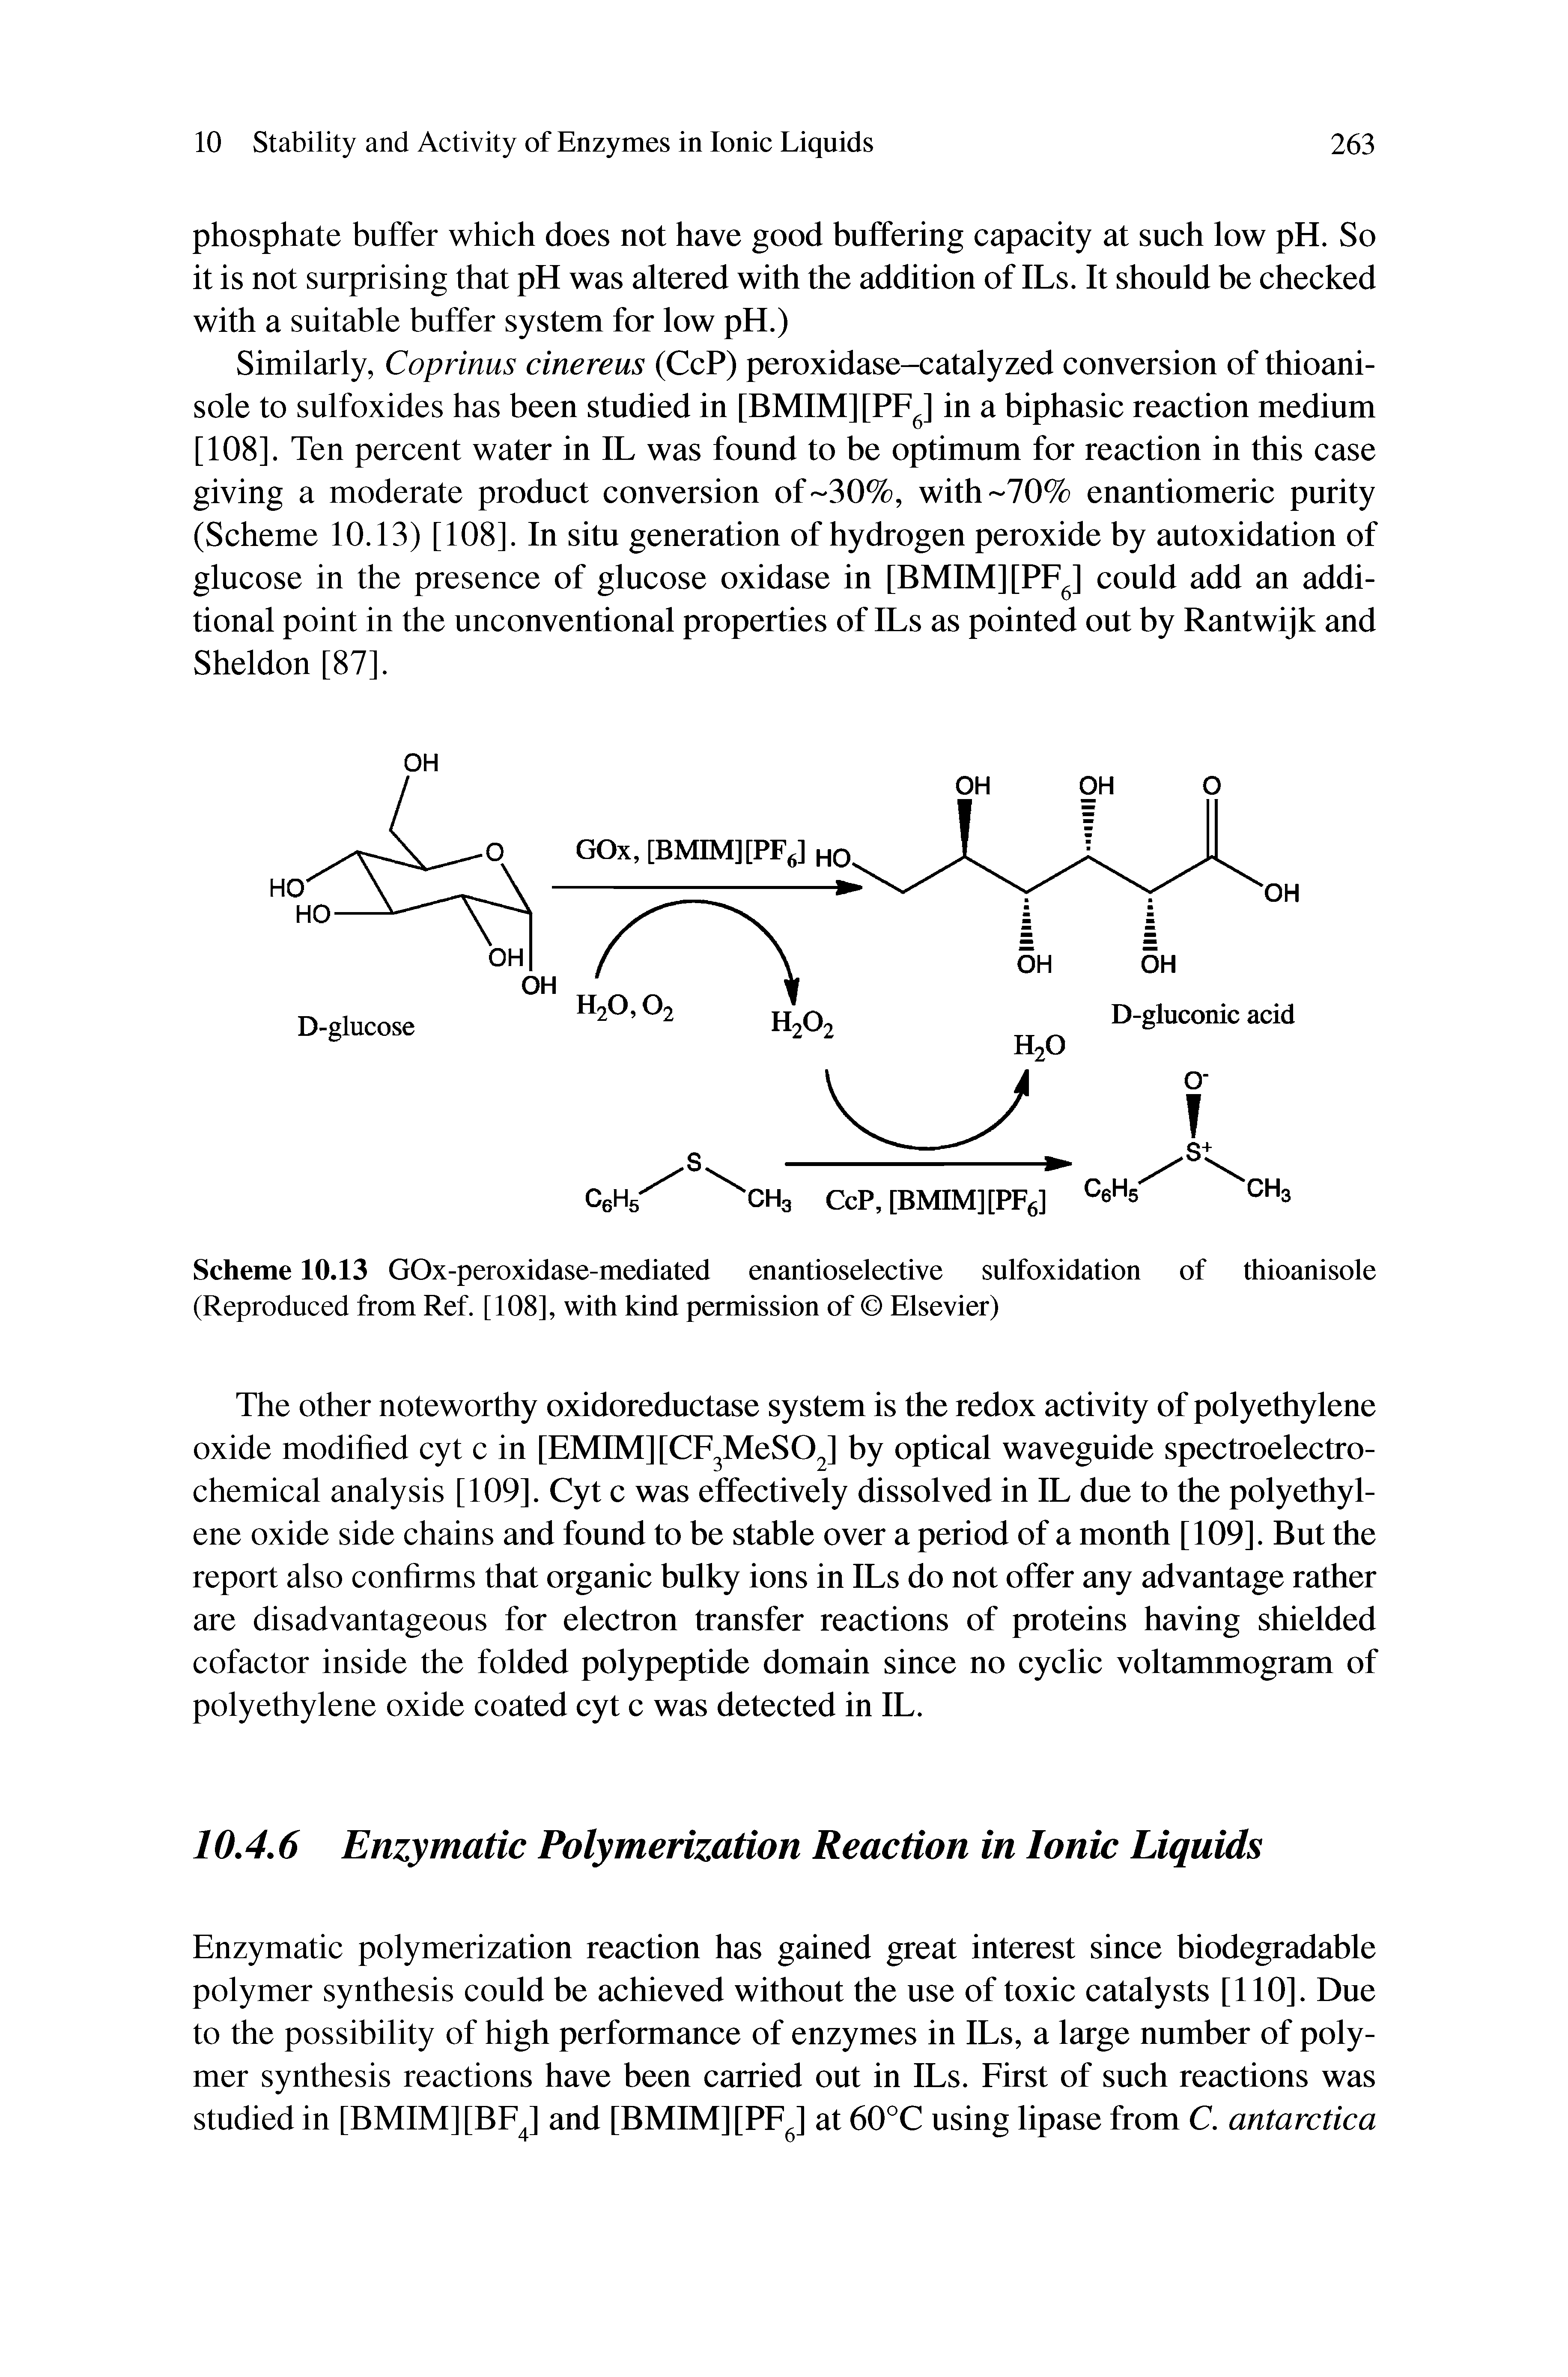 Scheme 10.13 GOx-peroxidase-mediated enantioselective sulfoxidation of thioanisole (Reproduced from Ref. [108], with kind permission of Elsevier)...